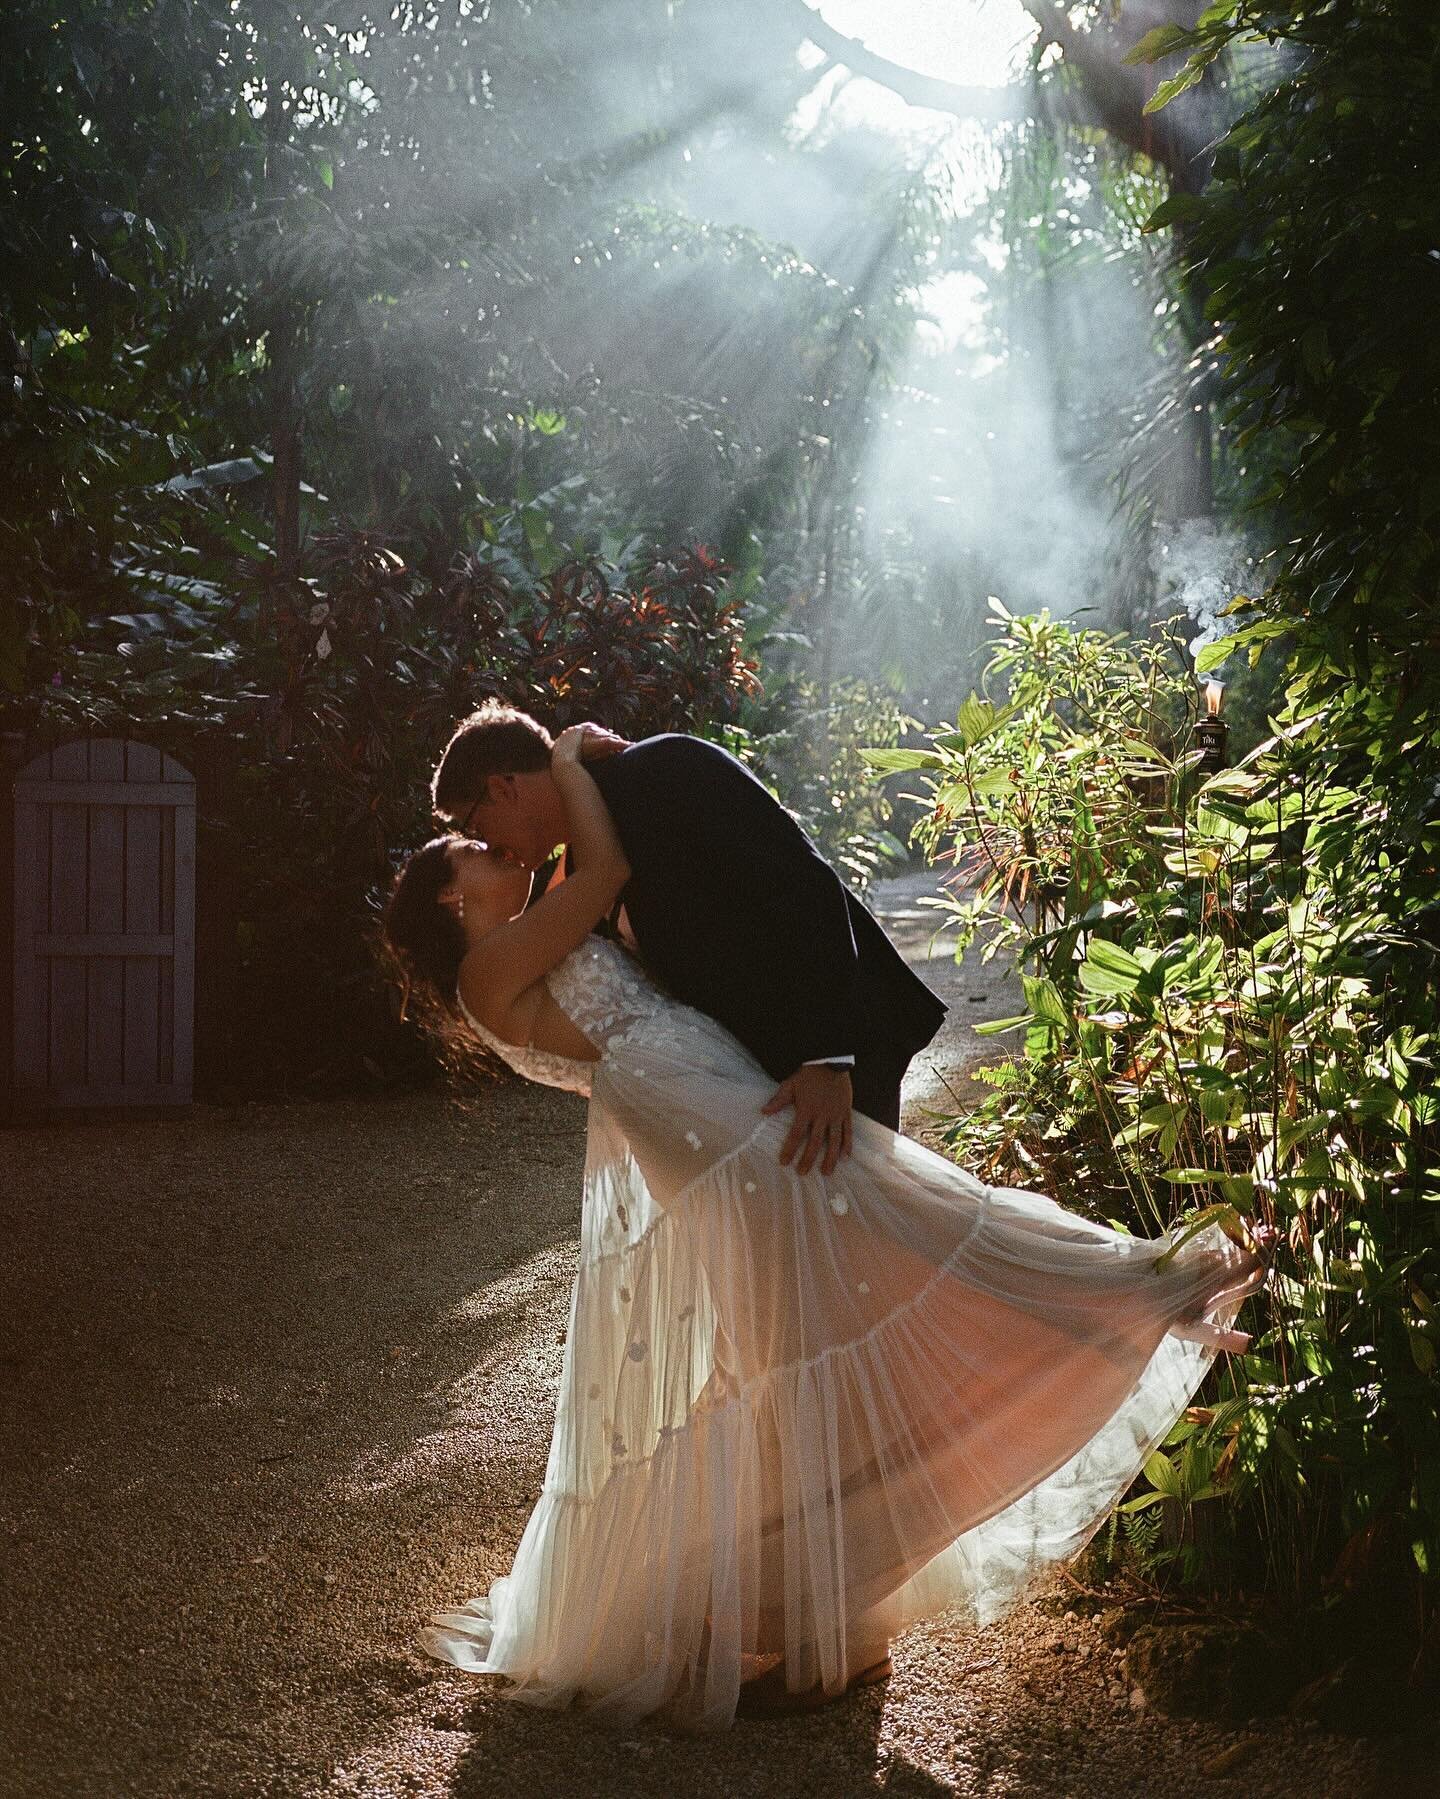 Sloane and Johnny dancing in the magical light ✨ on film